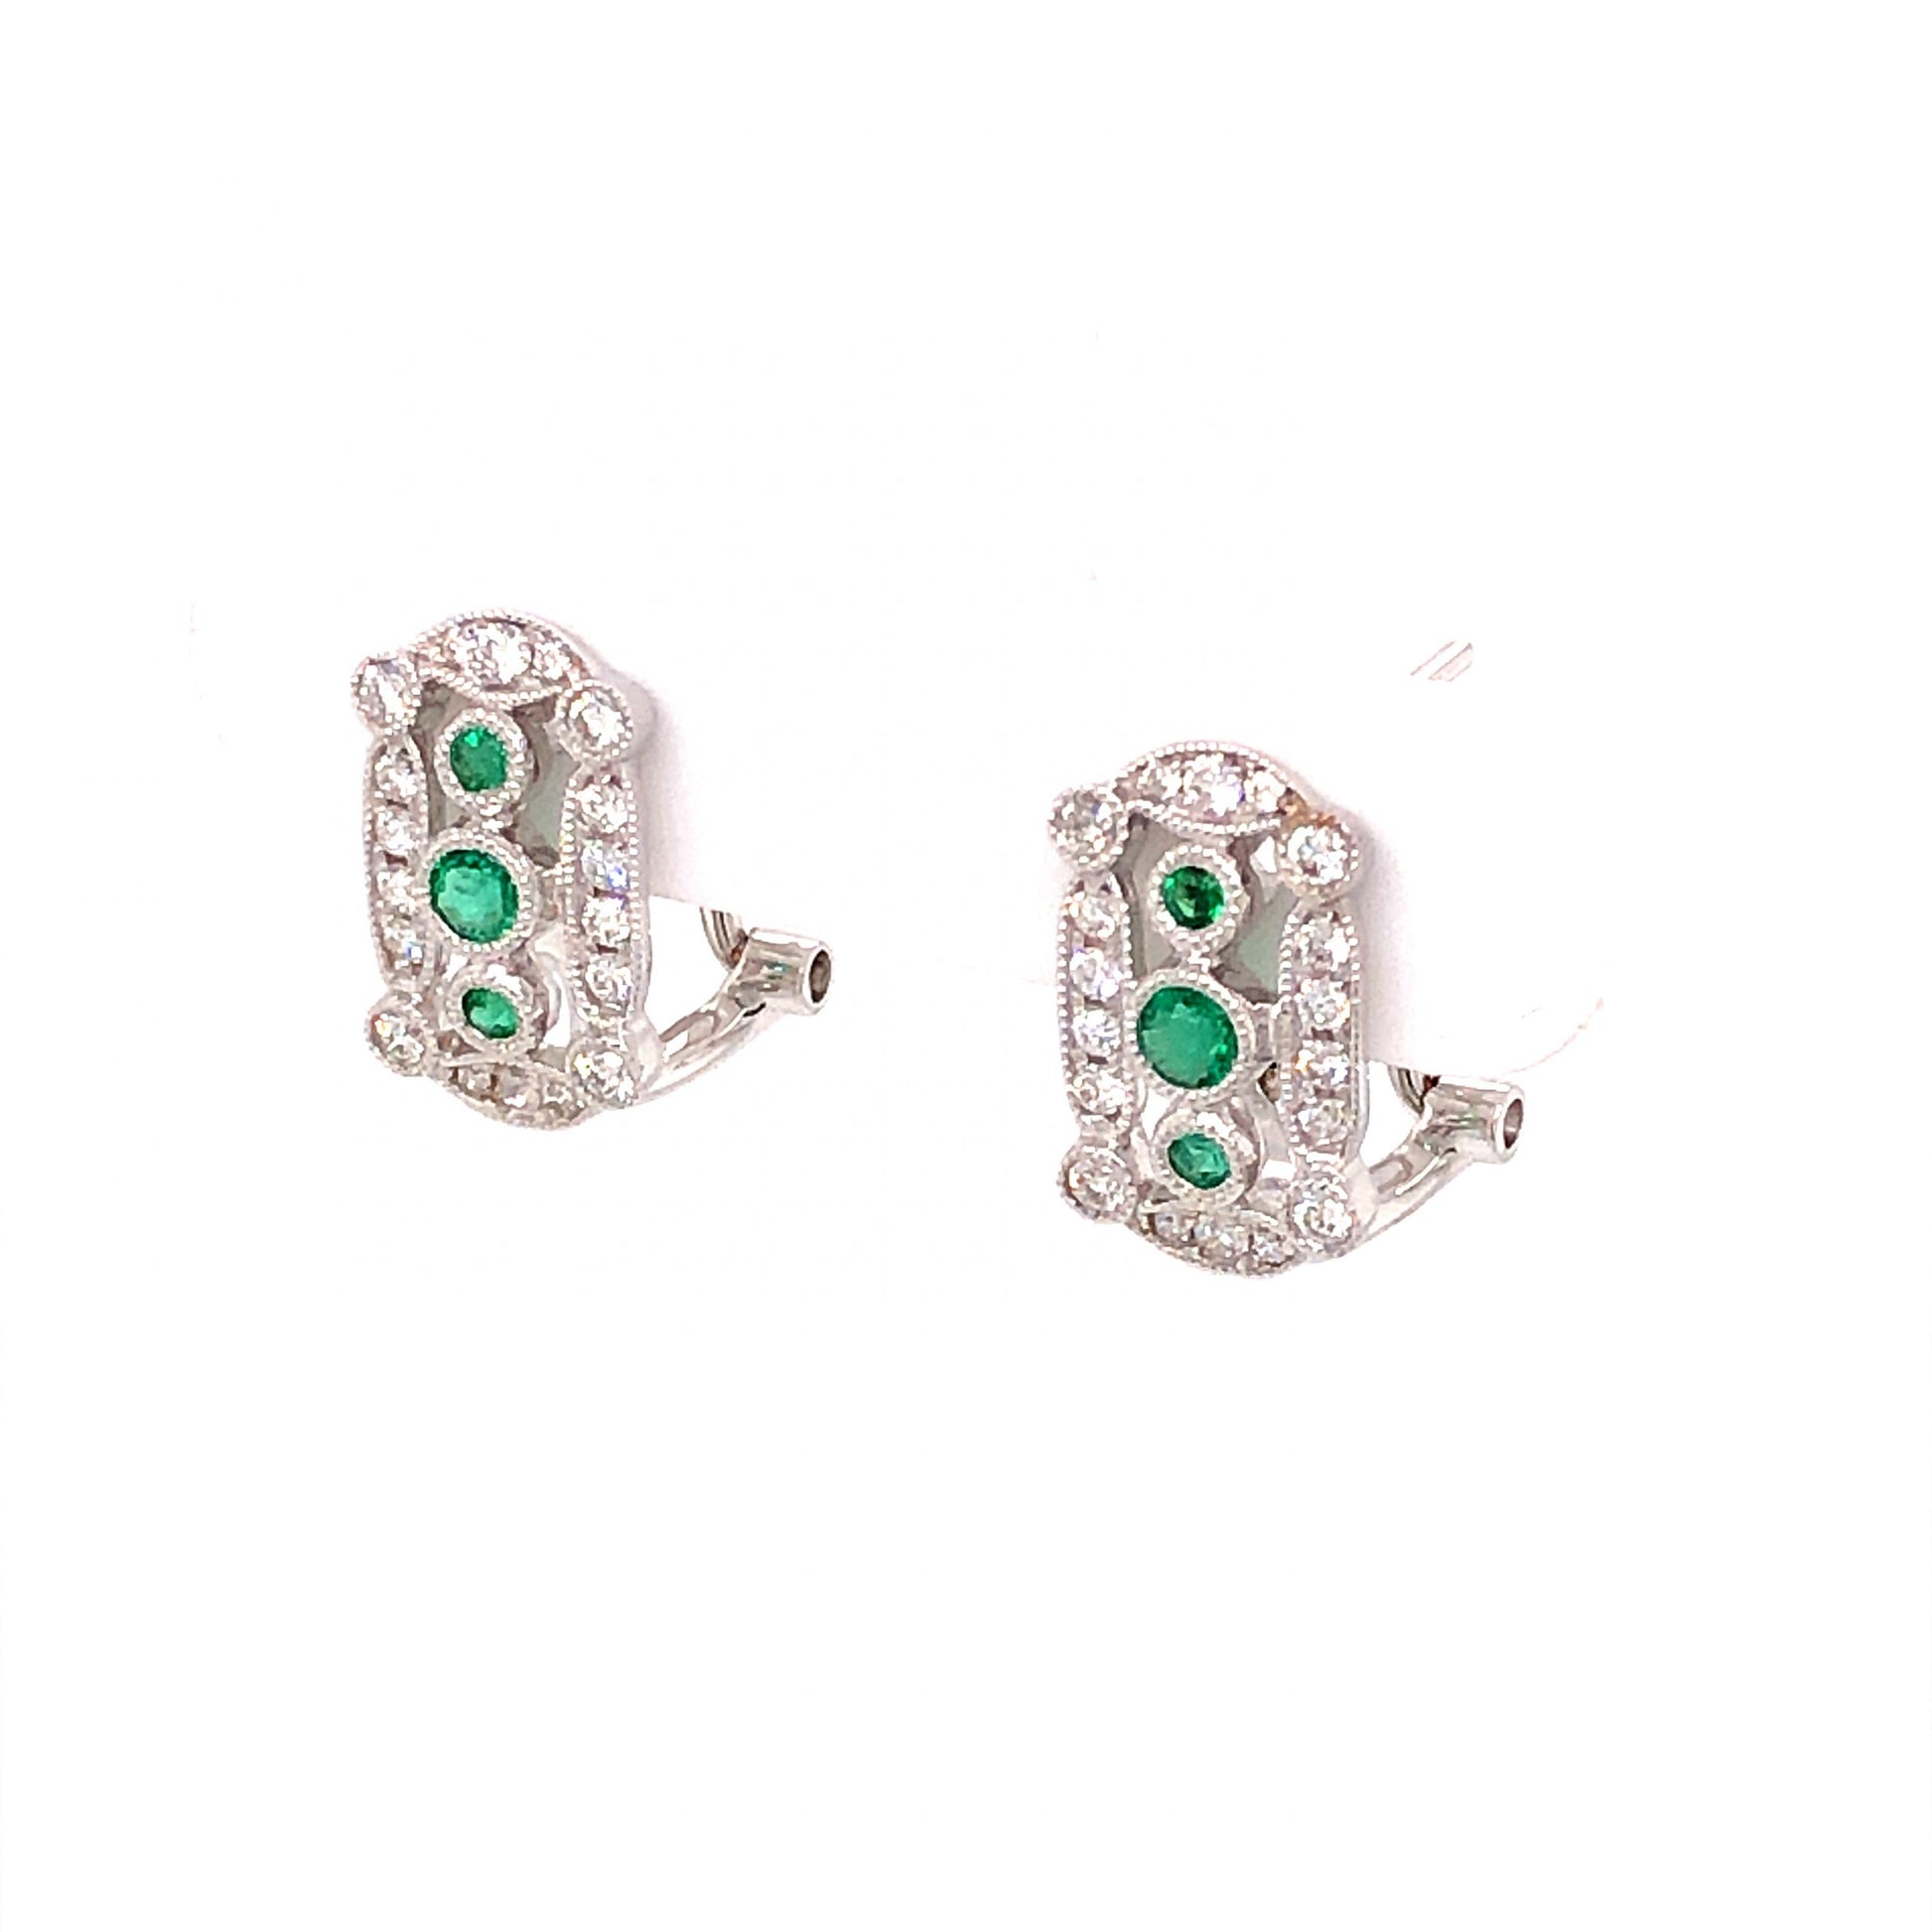 Round Cut Emerald and Diamond Stud Earrings in 18k White Gold